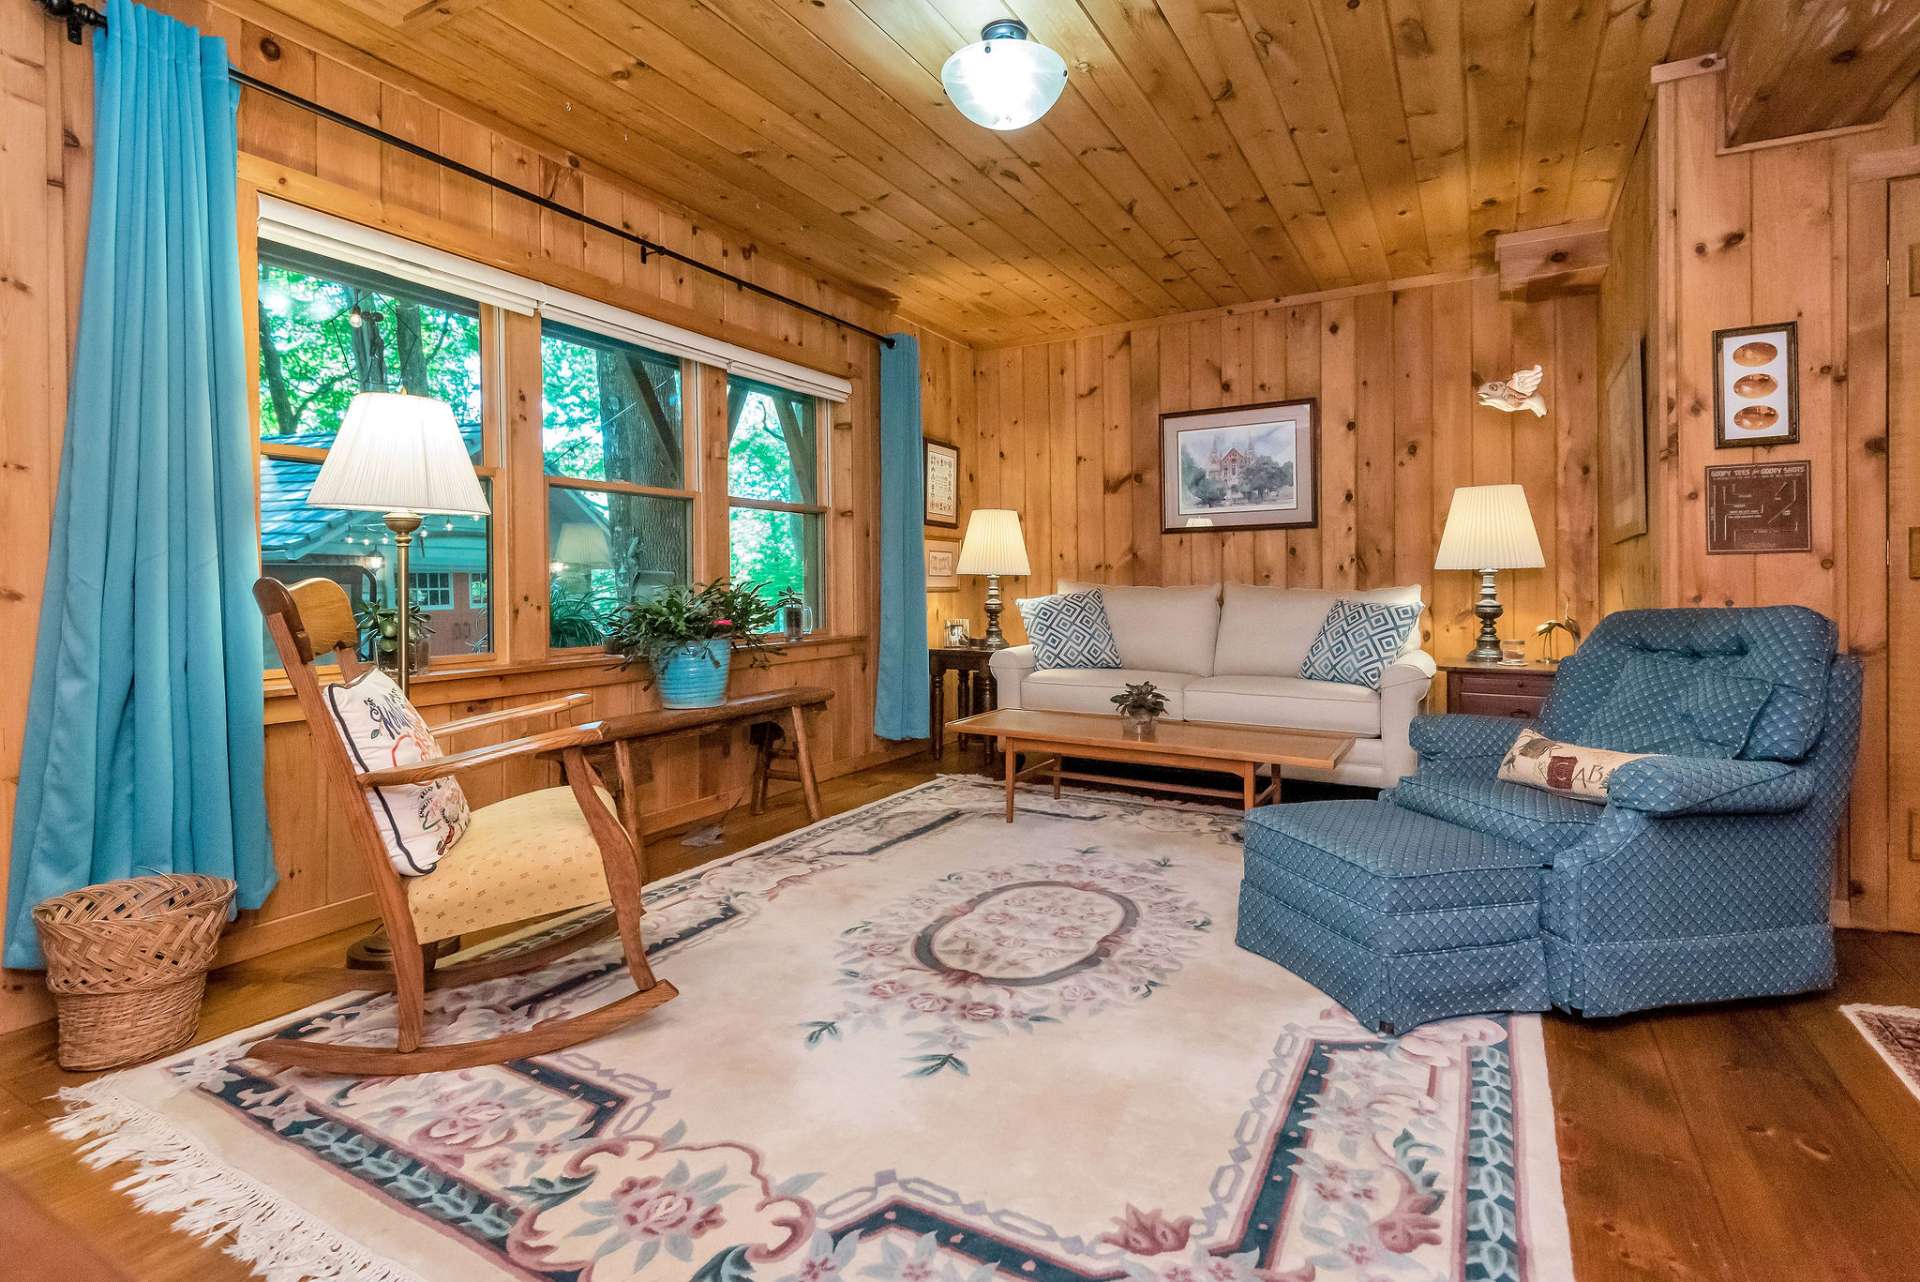 Lower level family room offers additional living space with large picture window to appreciate the natural setting. Custom blackout shades will convey with cabin.